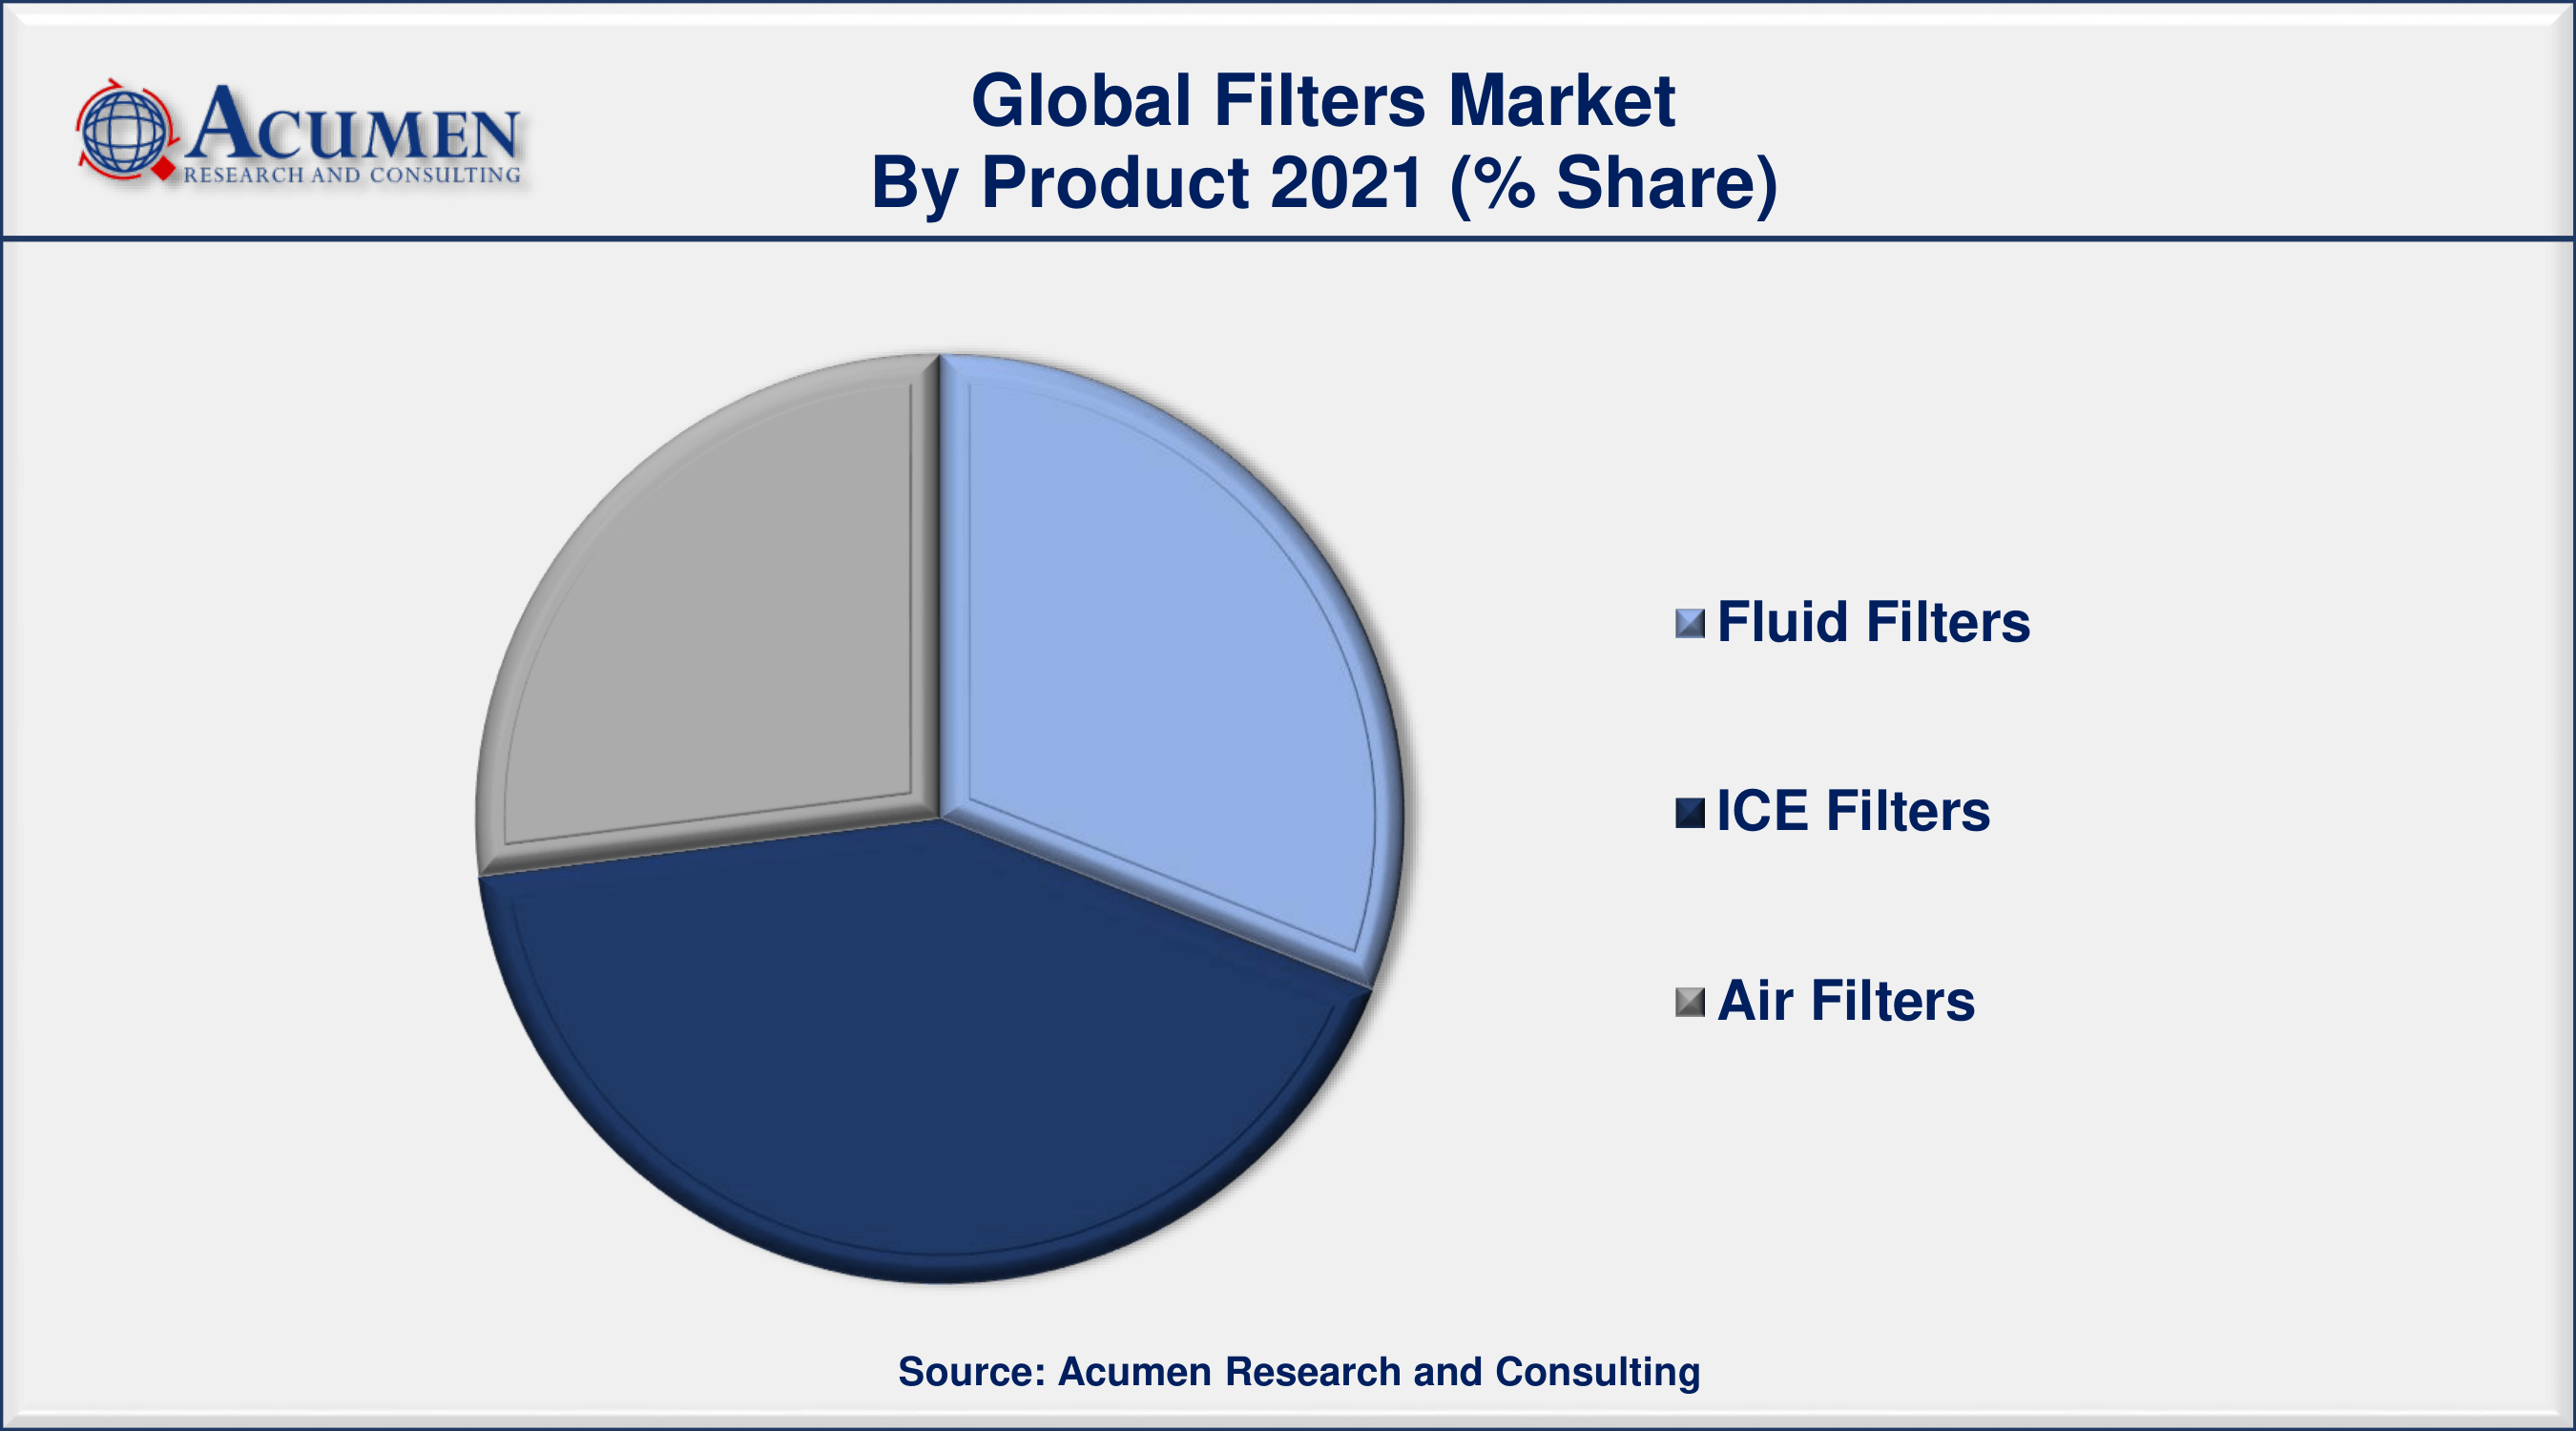 By product, ICE filters segment has contributed more than 41% market share in 2021